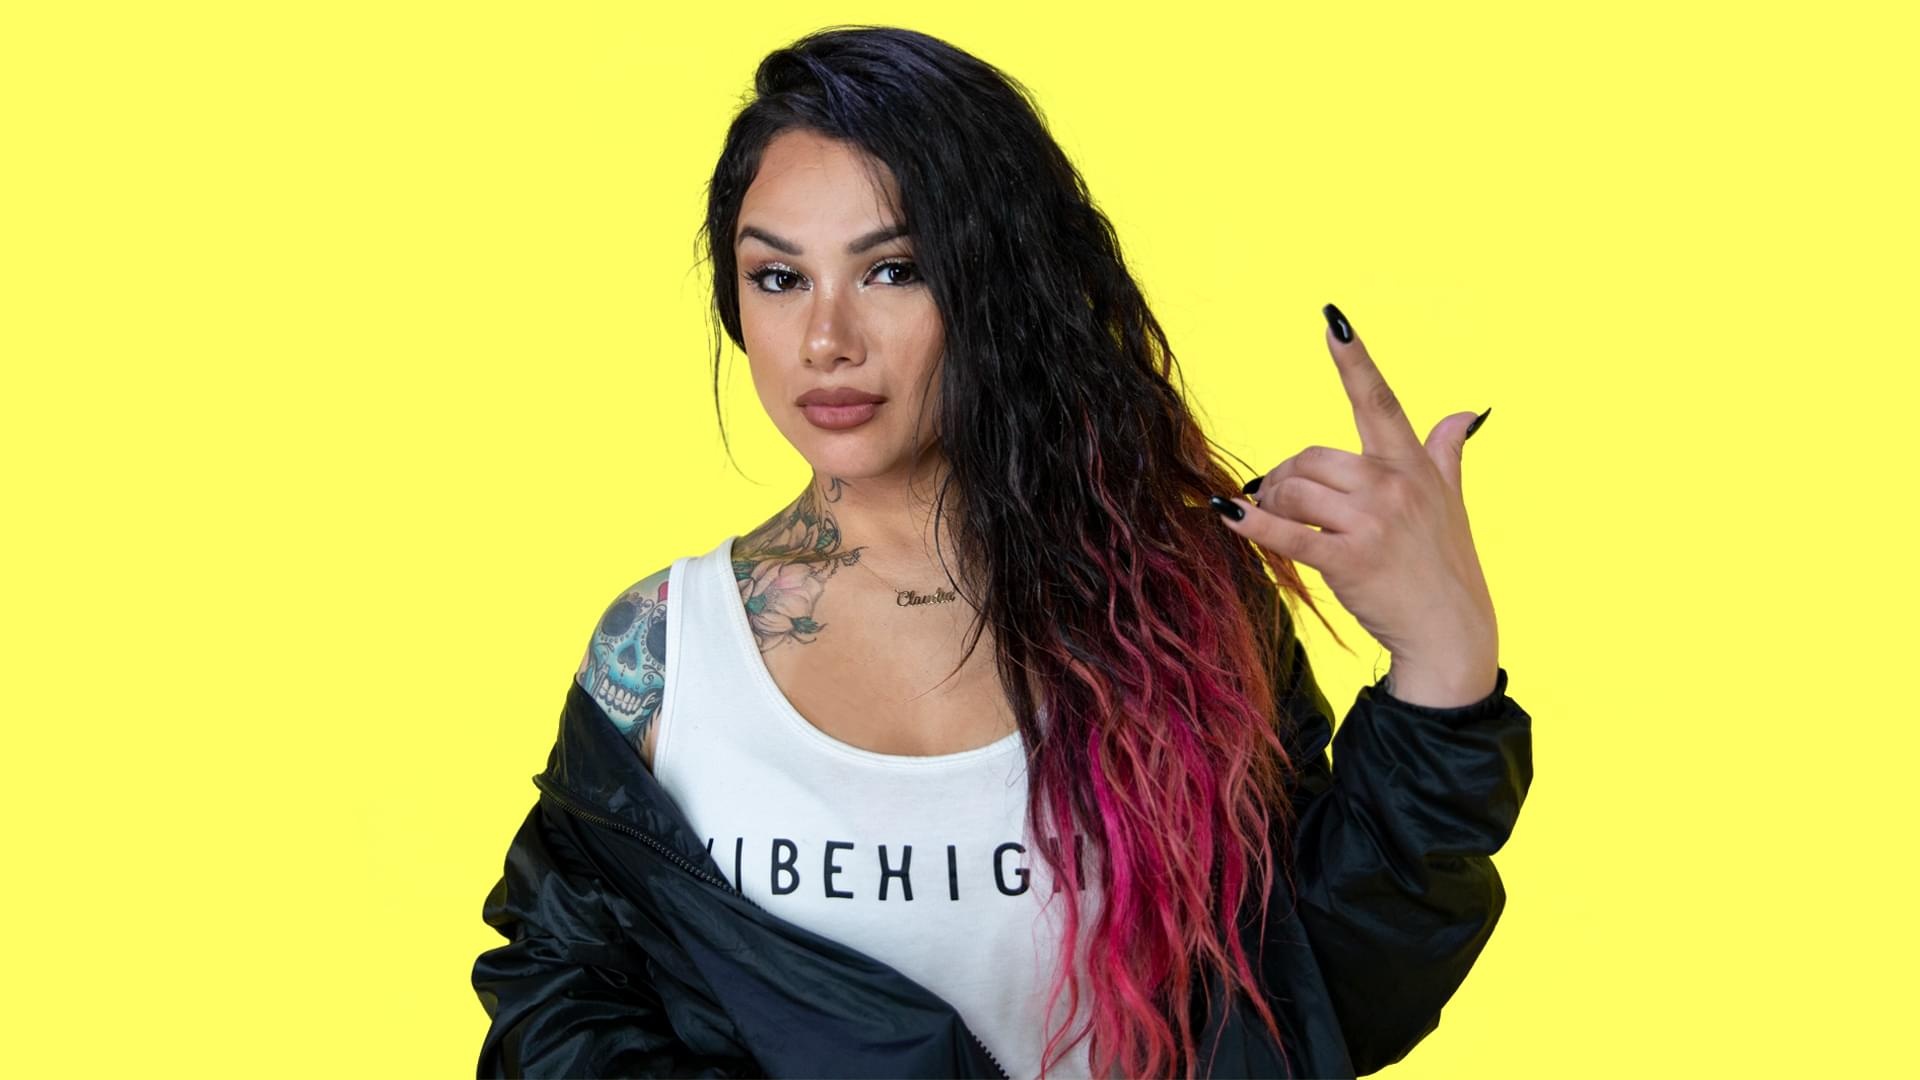 Snow Tha Product with special guests, Kuvo collaboration, Energetic music, Stage presence, 1920x1080 Full HD Desktop